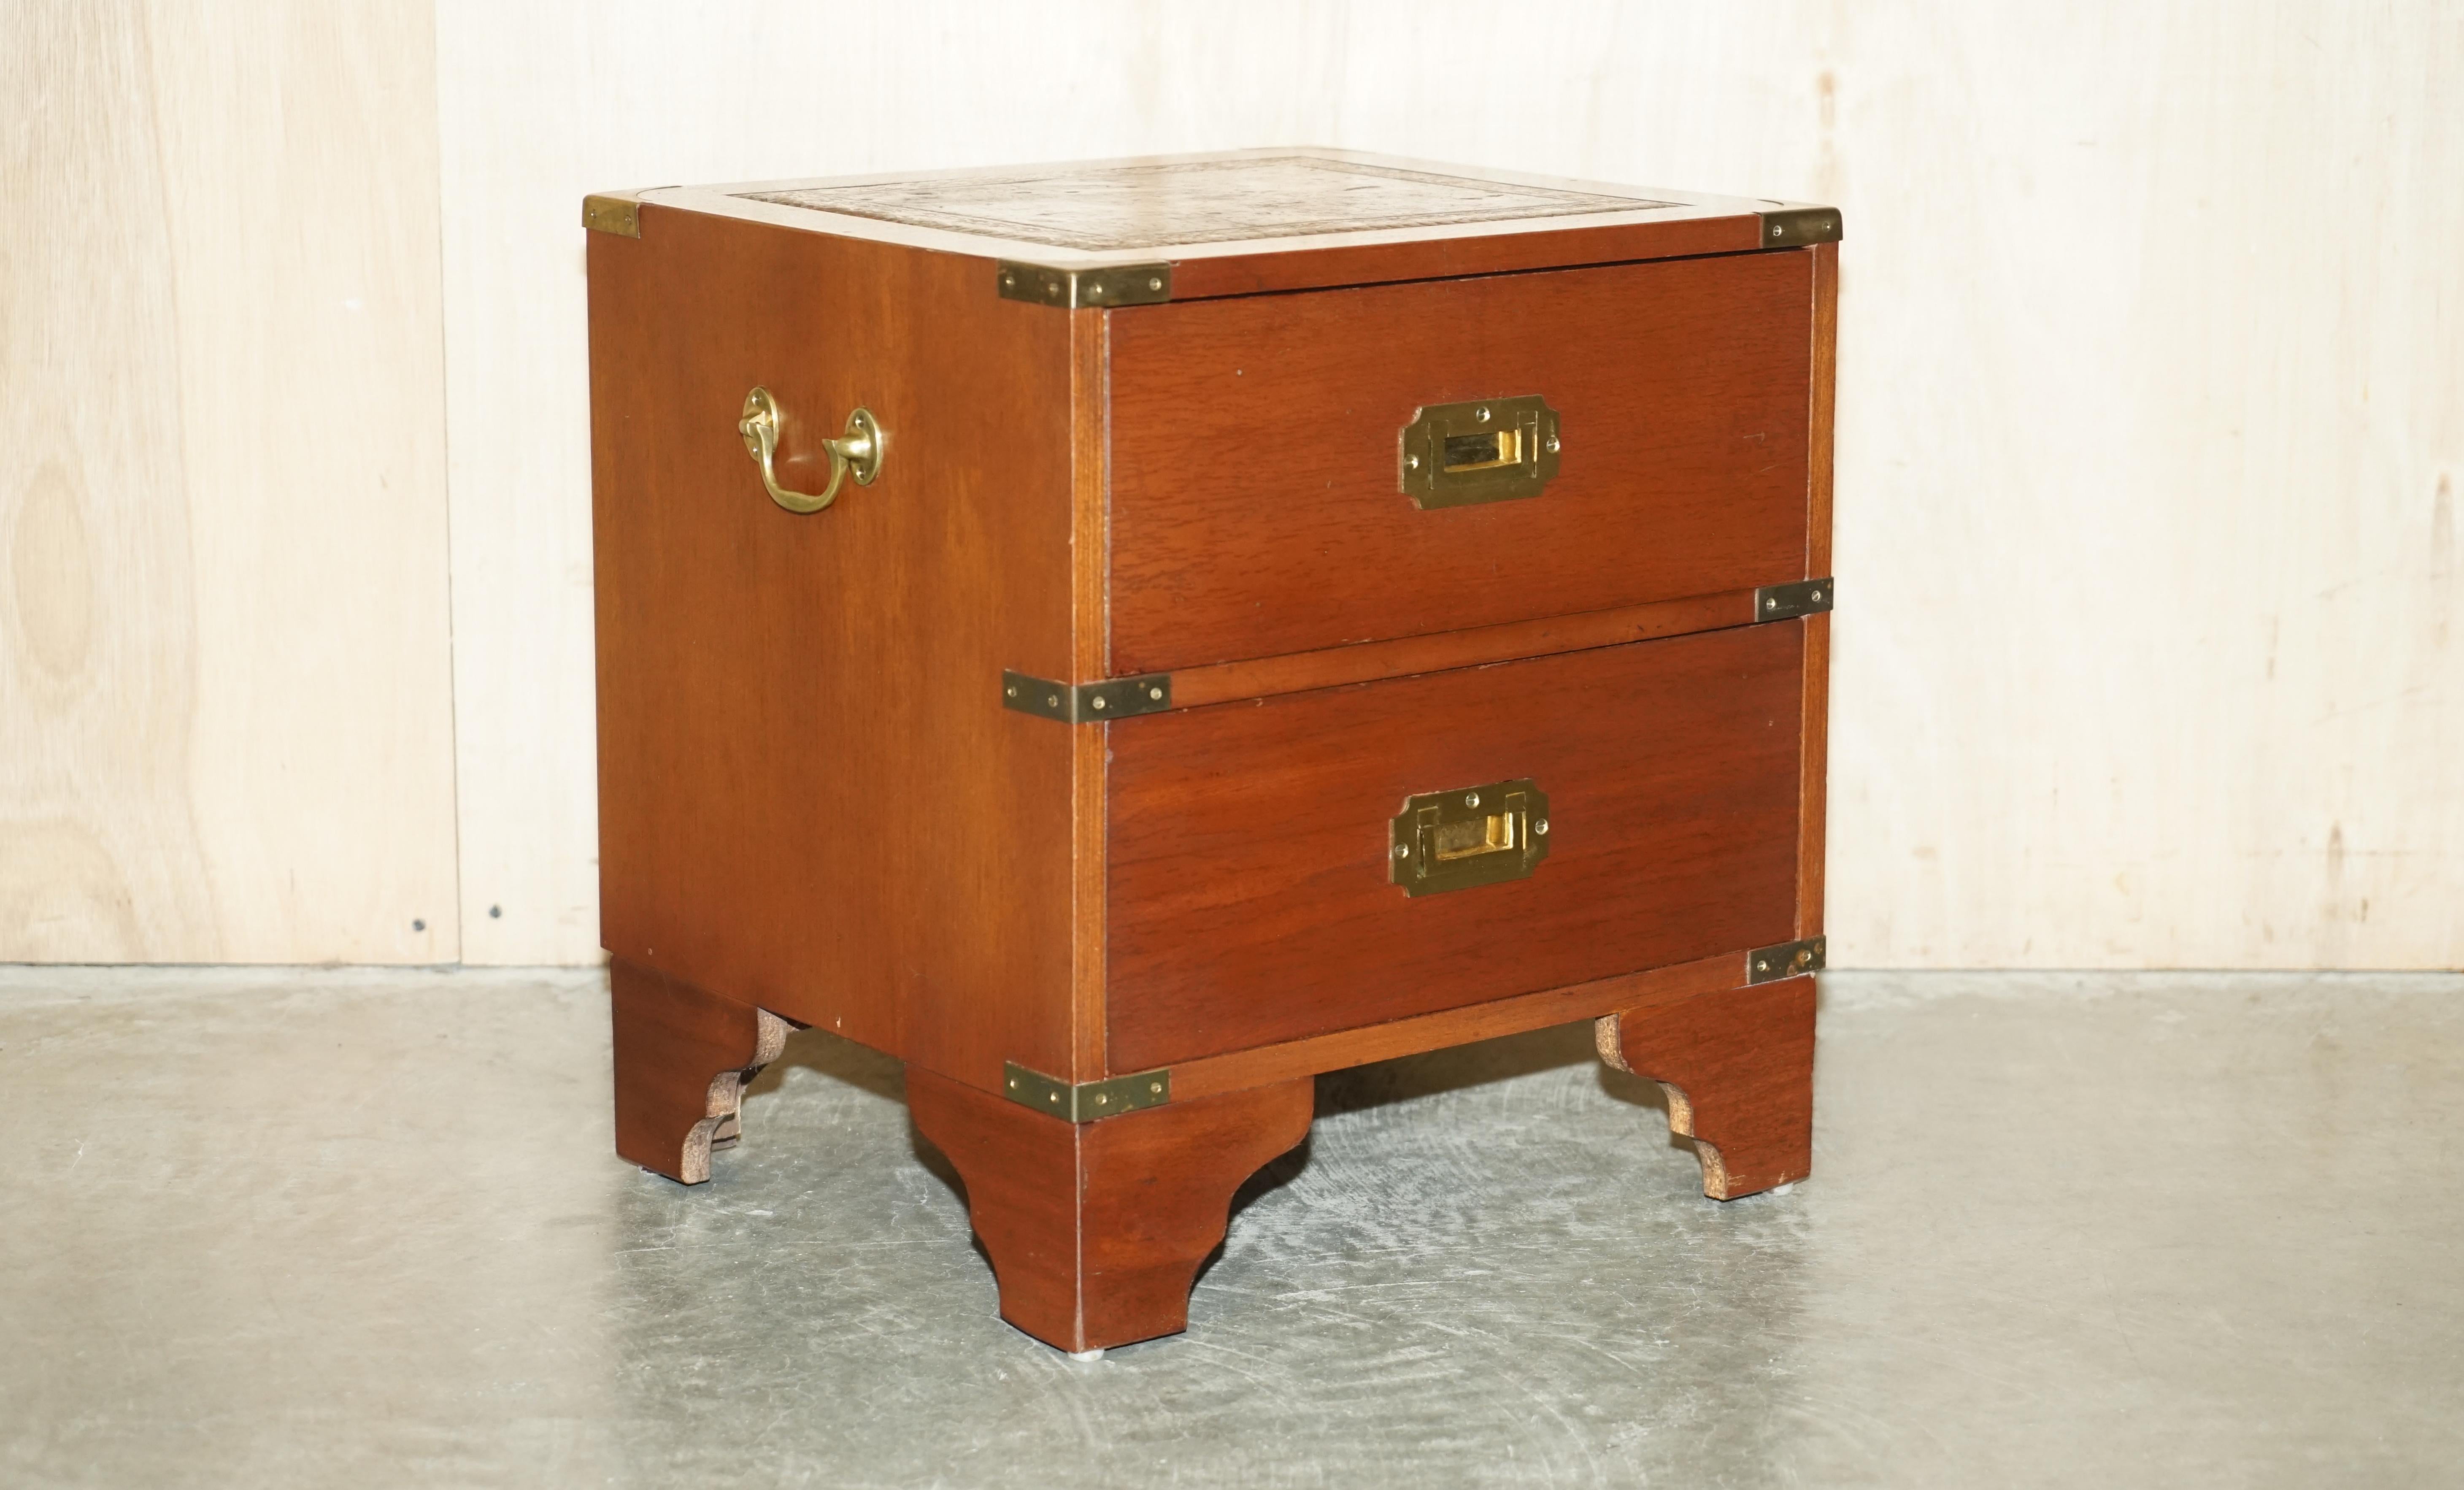 We are delighted to offer for sale this sublime vintage Harrods Kennedy Military Campaign side table with drawers and brown leather top 

A truly stunning and well made piece by Kennedy Furniture and retailed through Harrods London. It works in